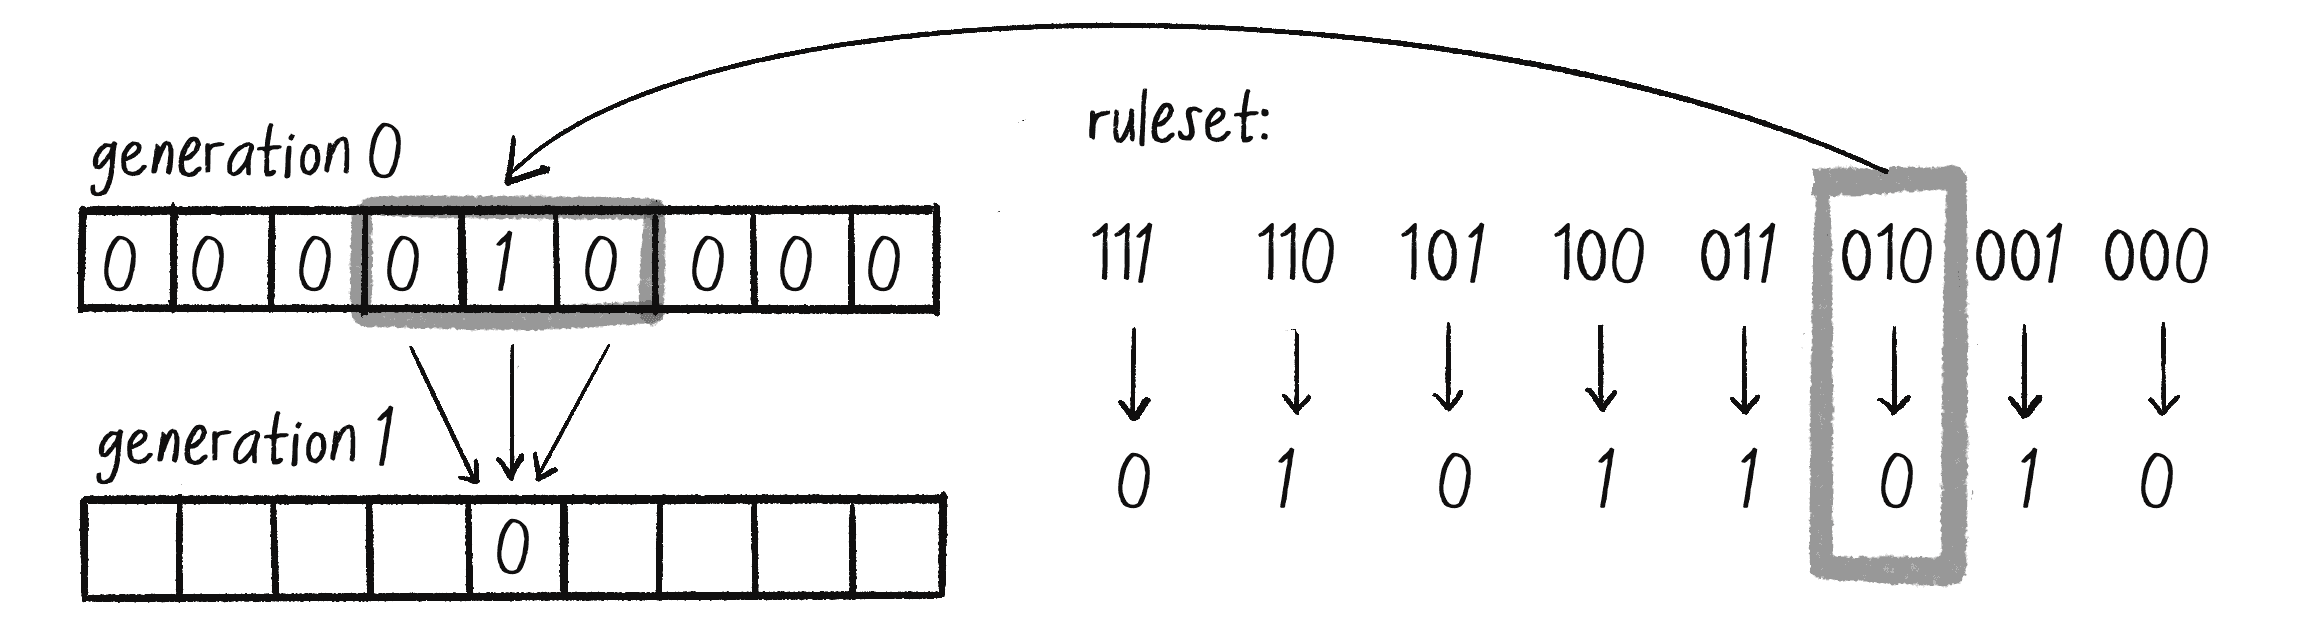 Figure 7.10: Determining a state for generation 1 by using the CA ruleset